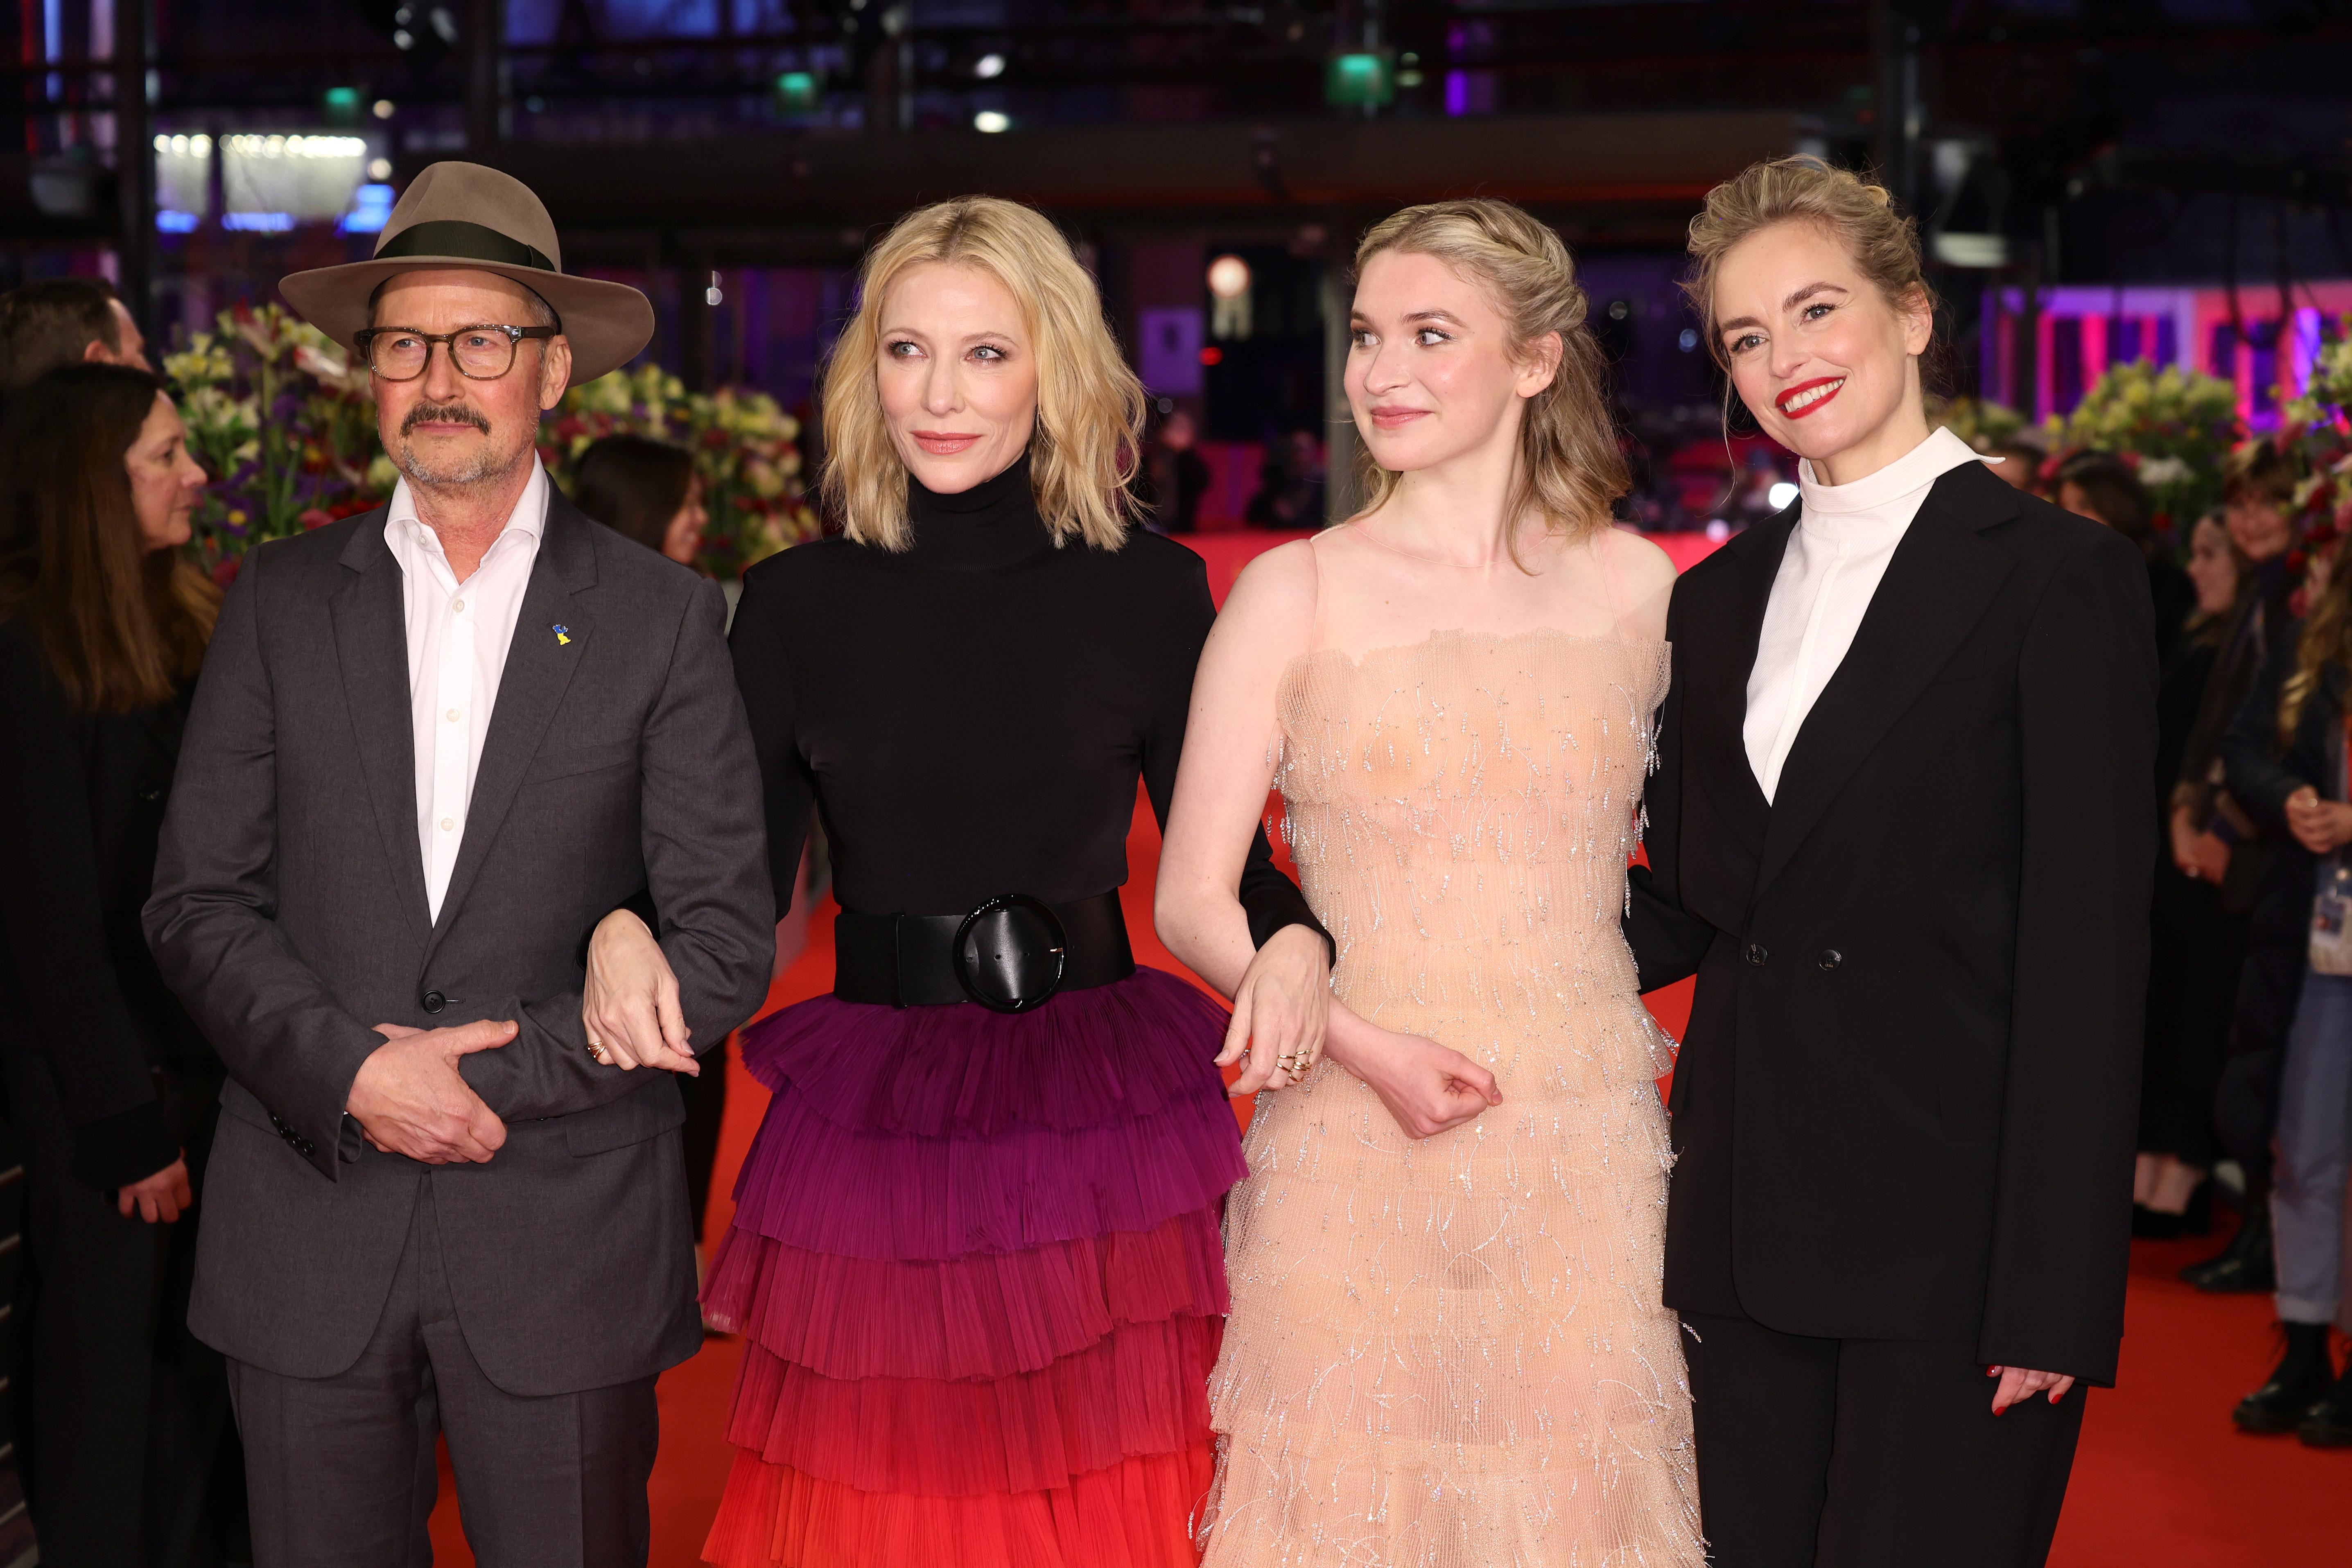 BERLIN, GERMANY - FEBRUARY 23: Todd Field, Cate Blanchett, Sophie Kauer and Nina Hoss attend the "TAR" premiere during the 73rd Berlinale International Film Festival Berlin at Berlinale Palast on February 23, 2023 in Berlin, Germany. (Photo by Andreas Rentz/Getty Images)